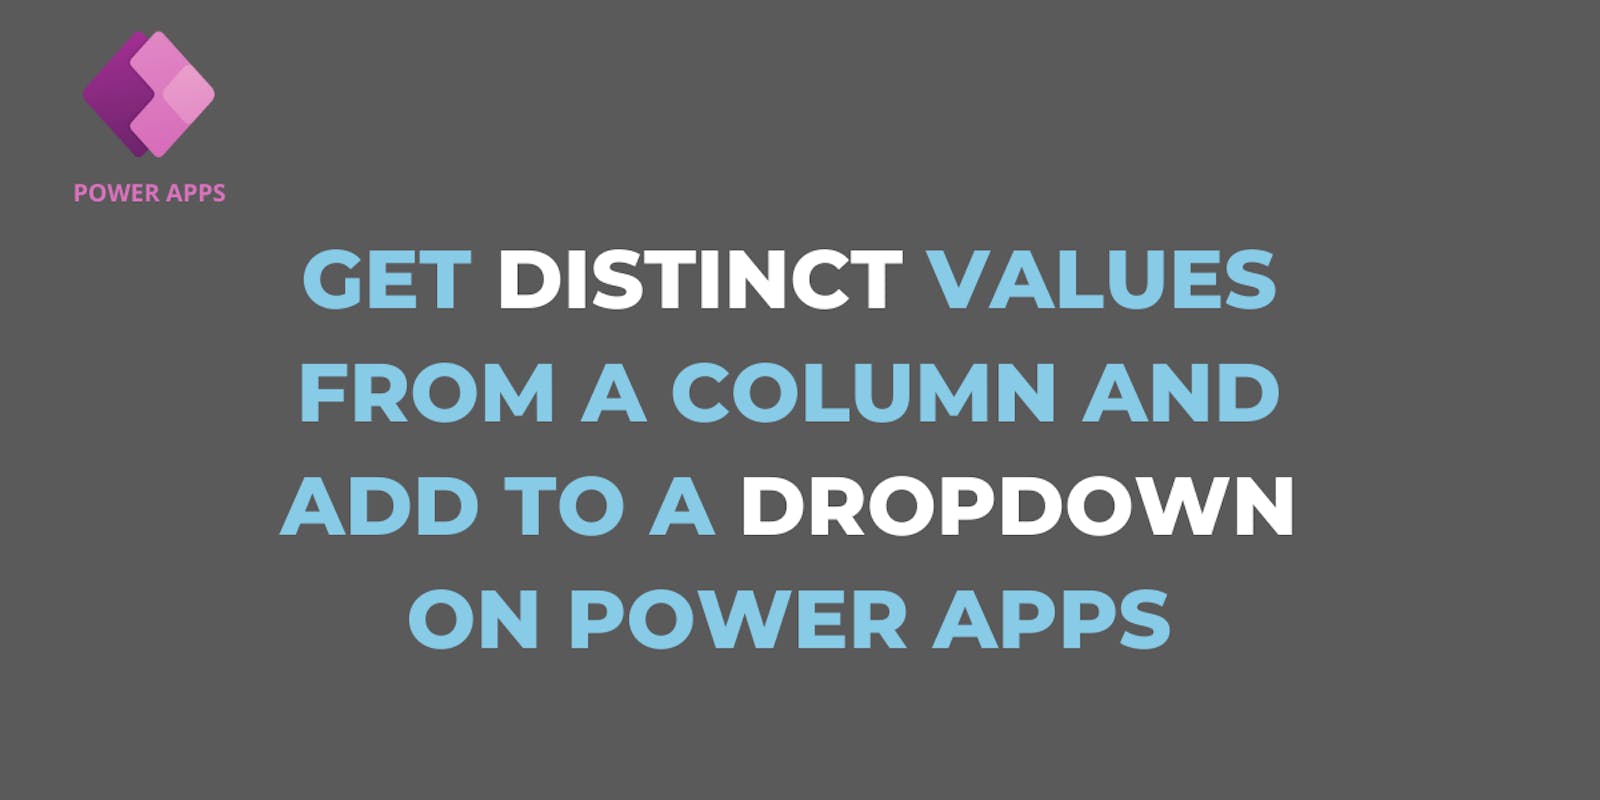 Get distinct values from a column and add them to a dropdown.